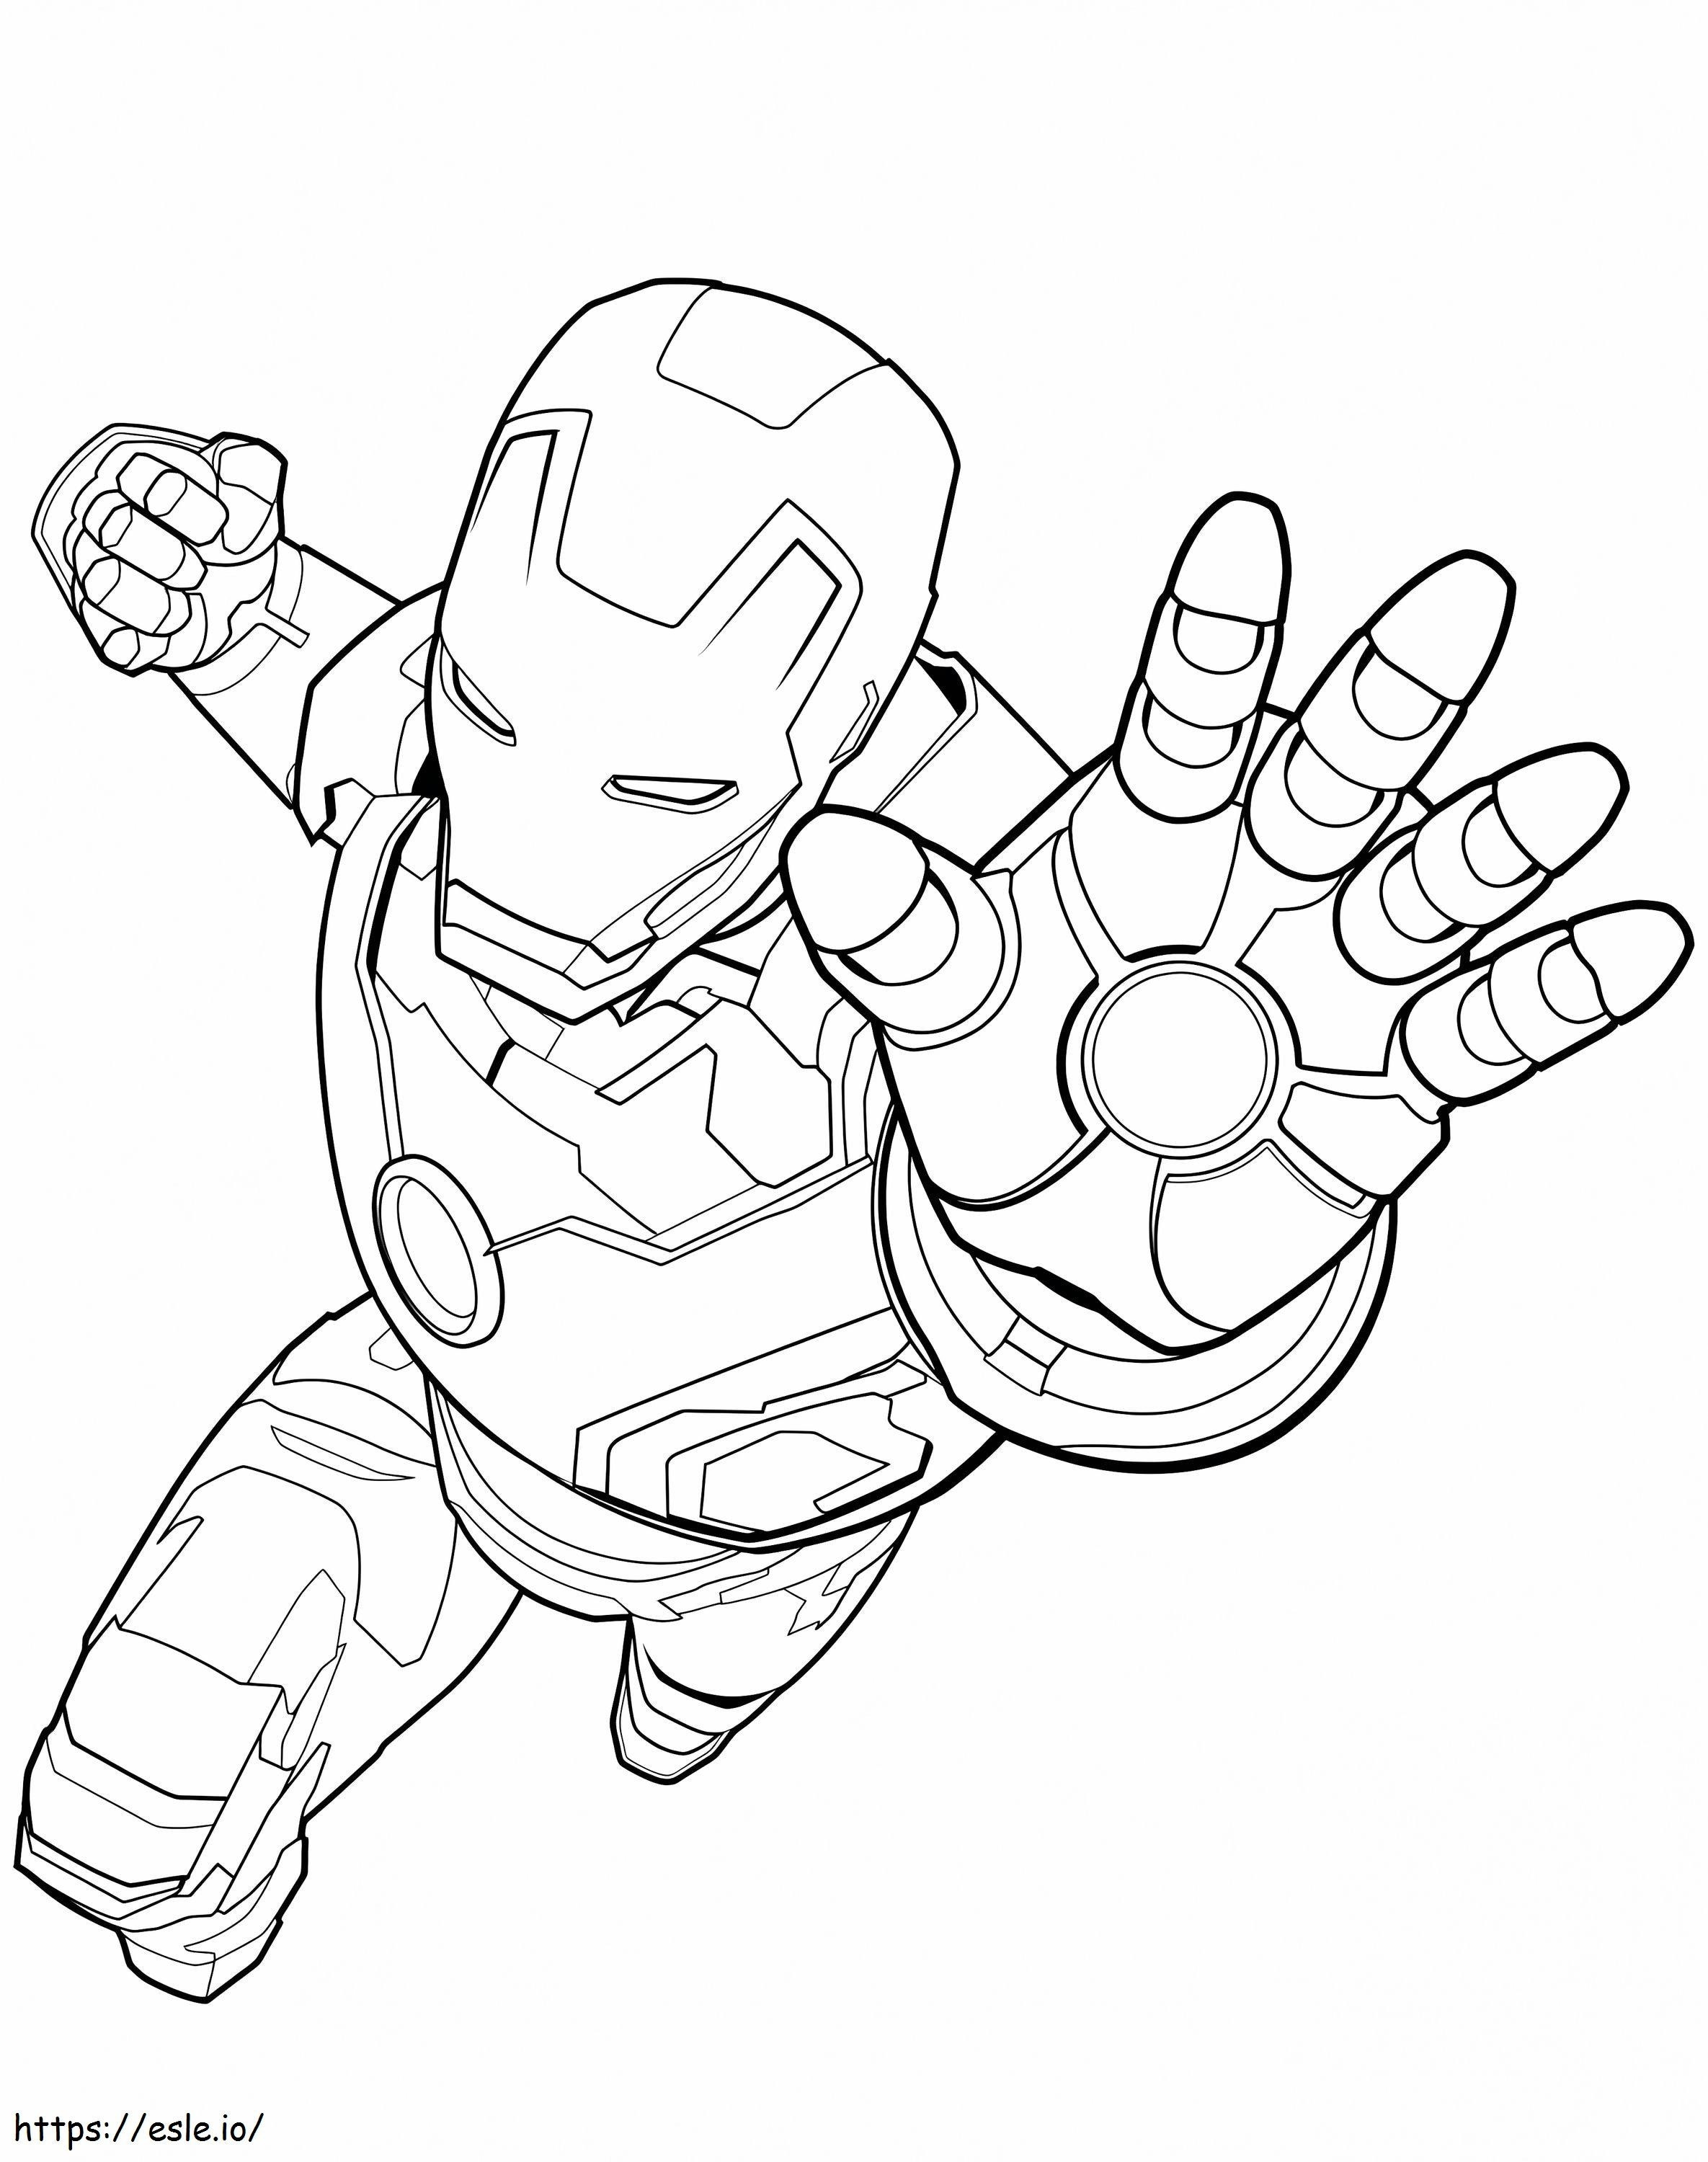 Iron Man Fight coloring page